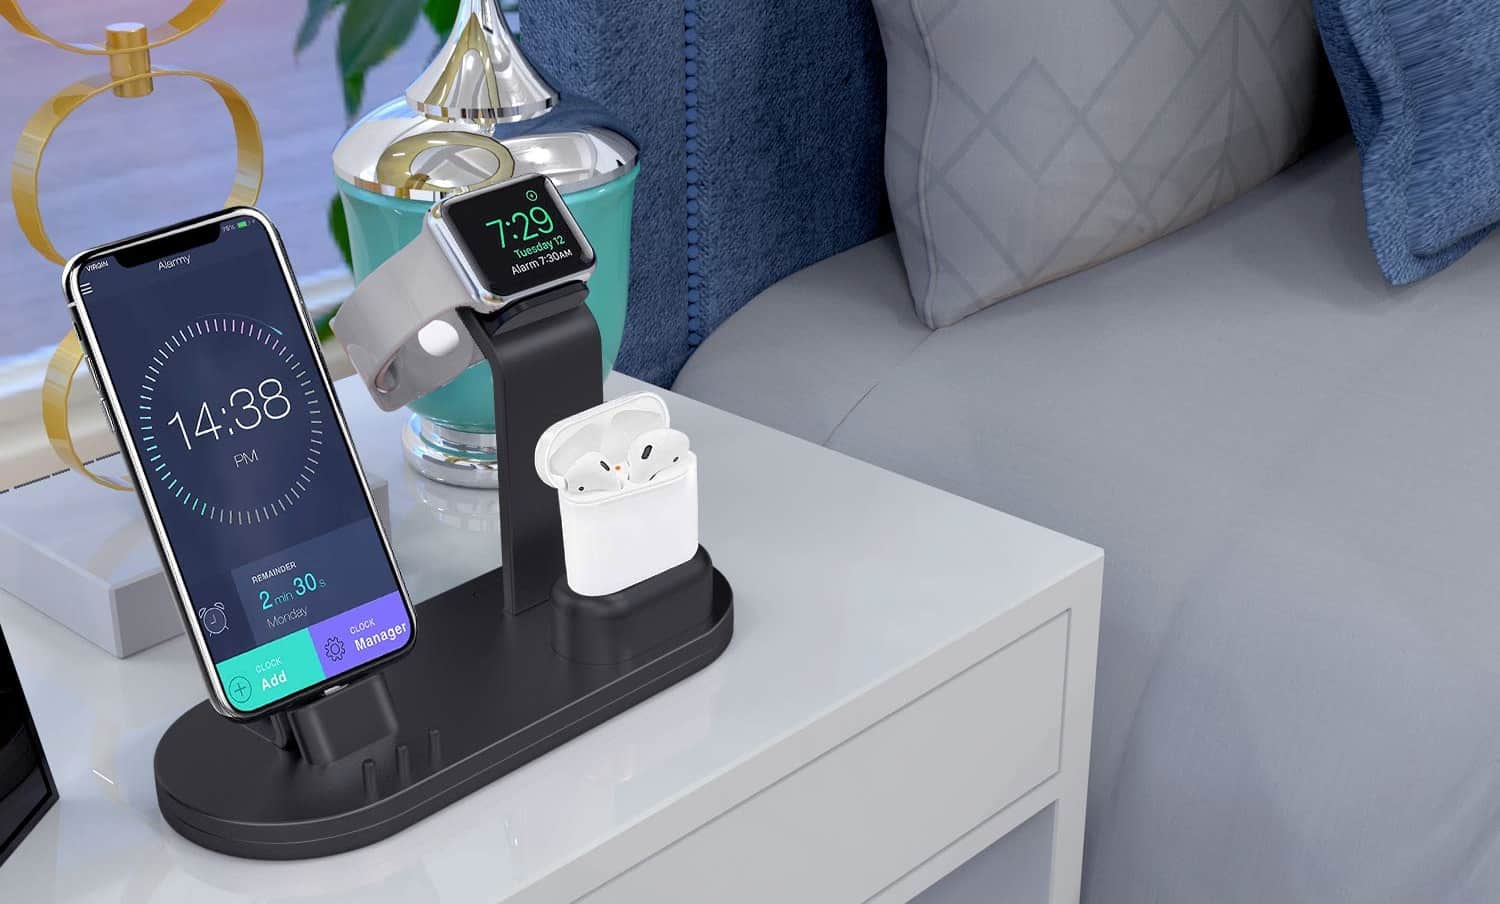 OLEBR 3 in 1 charging stand